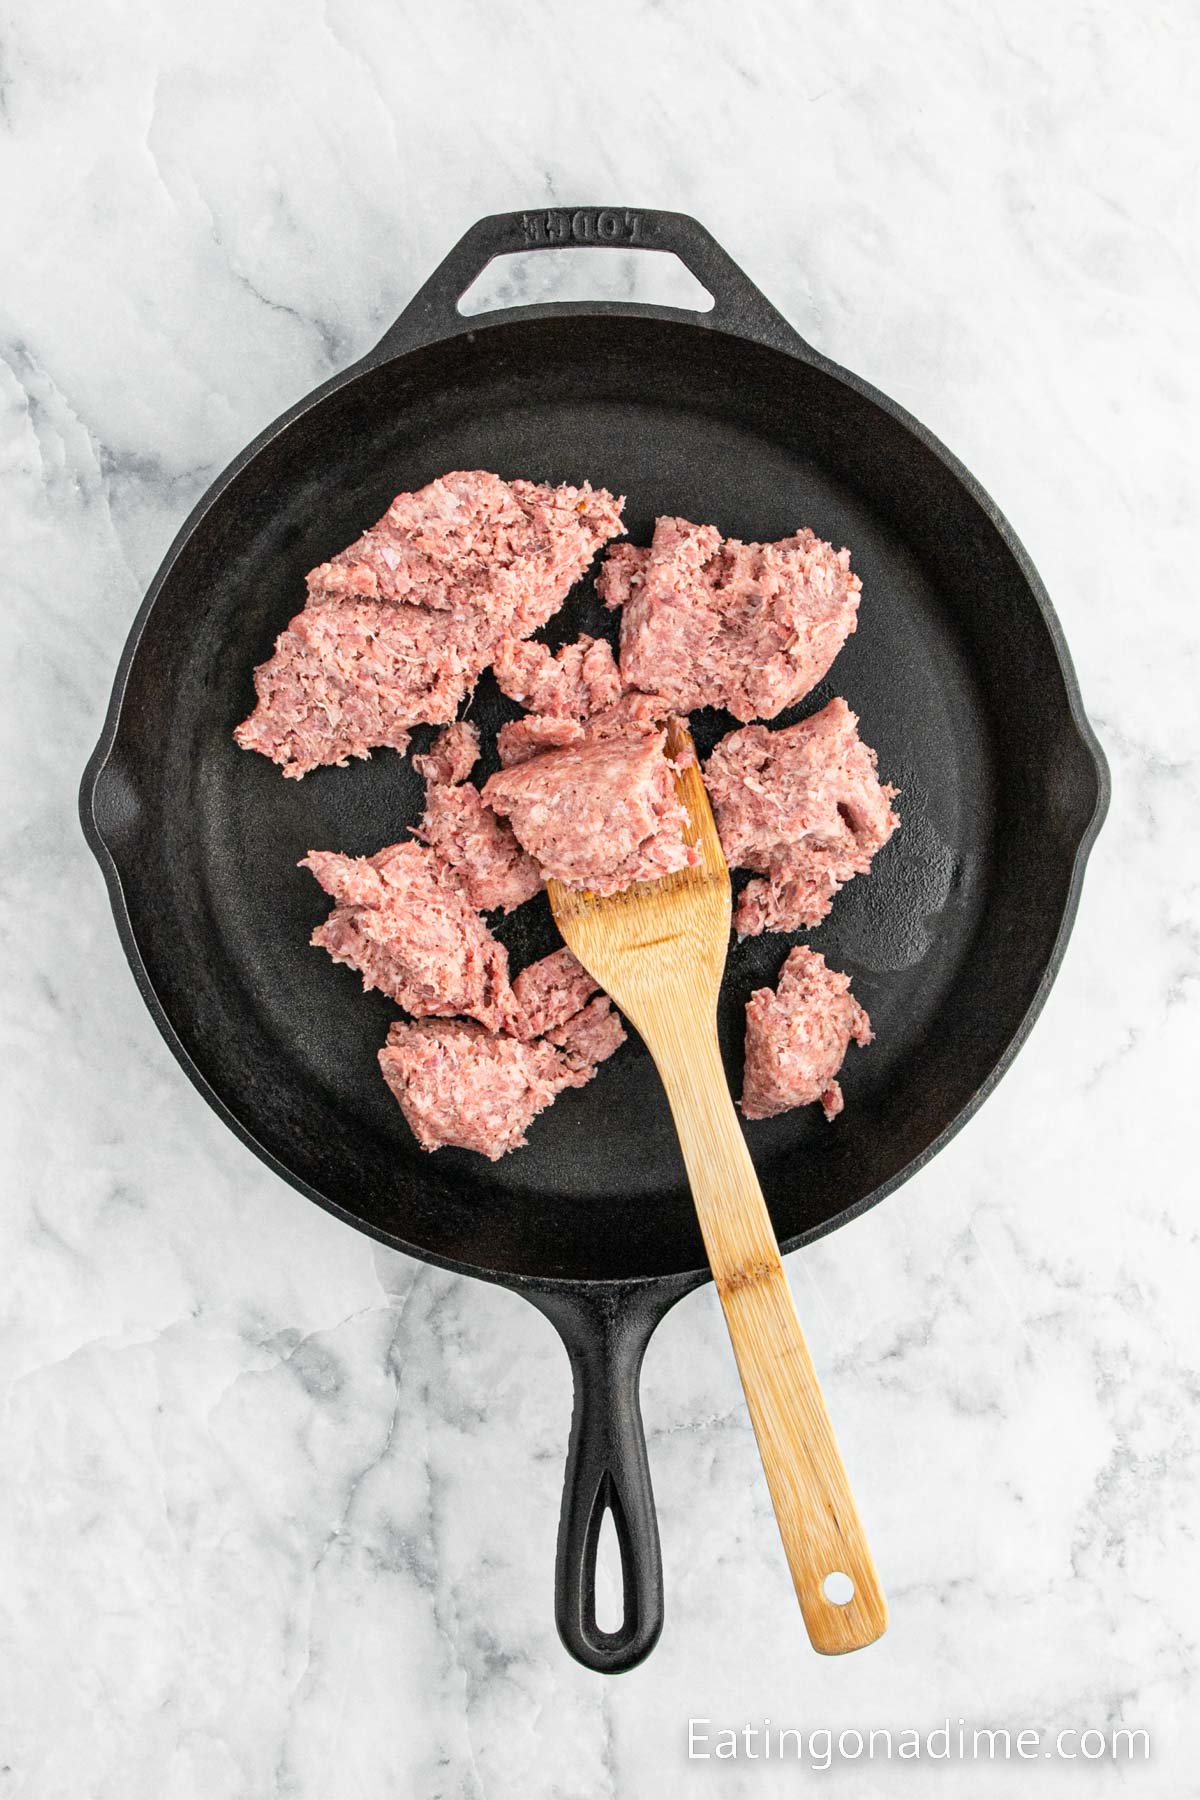 Cooking sausage in a cast iron skillet with a wooden spoon